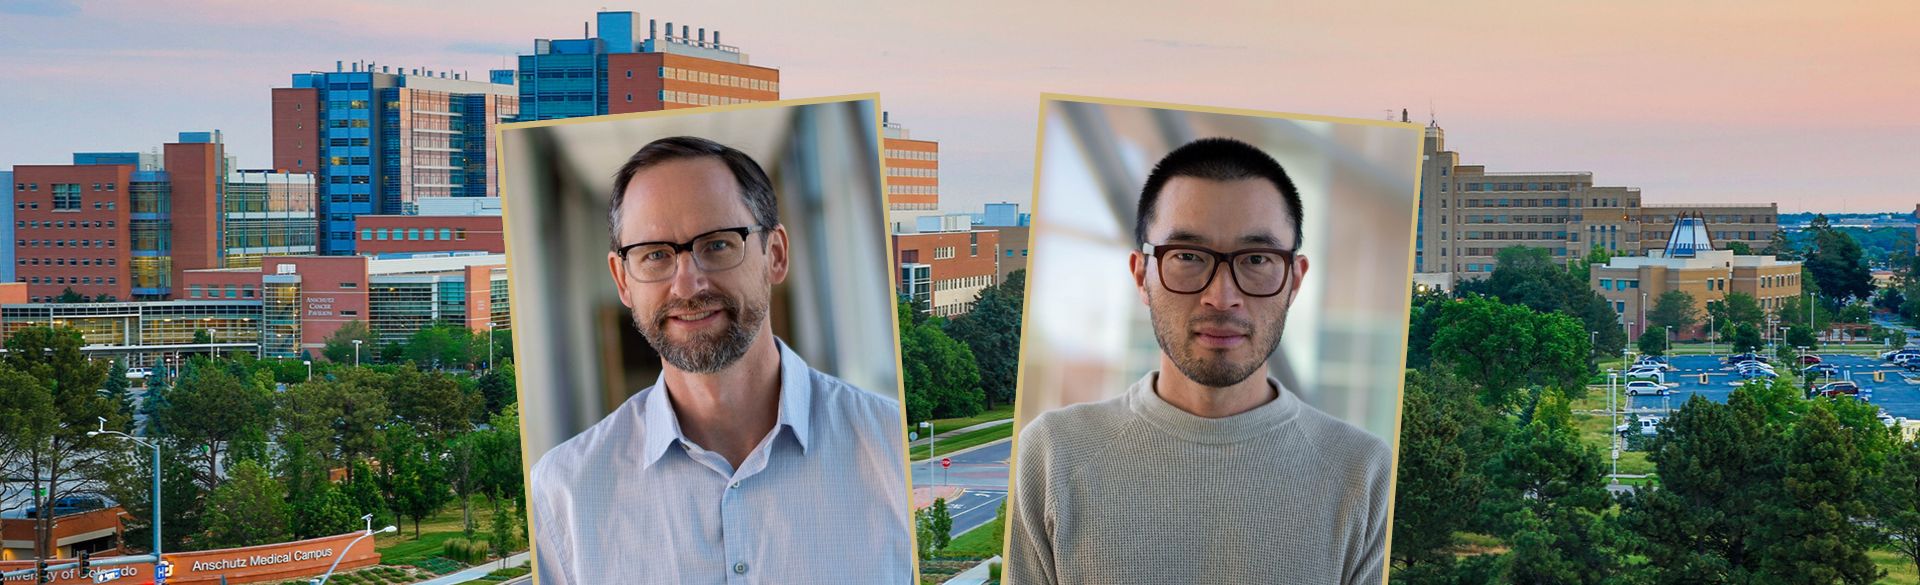 Scientists head shots superimposed over campus background